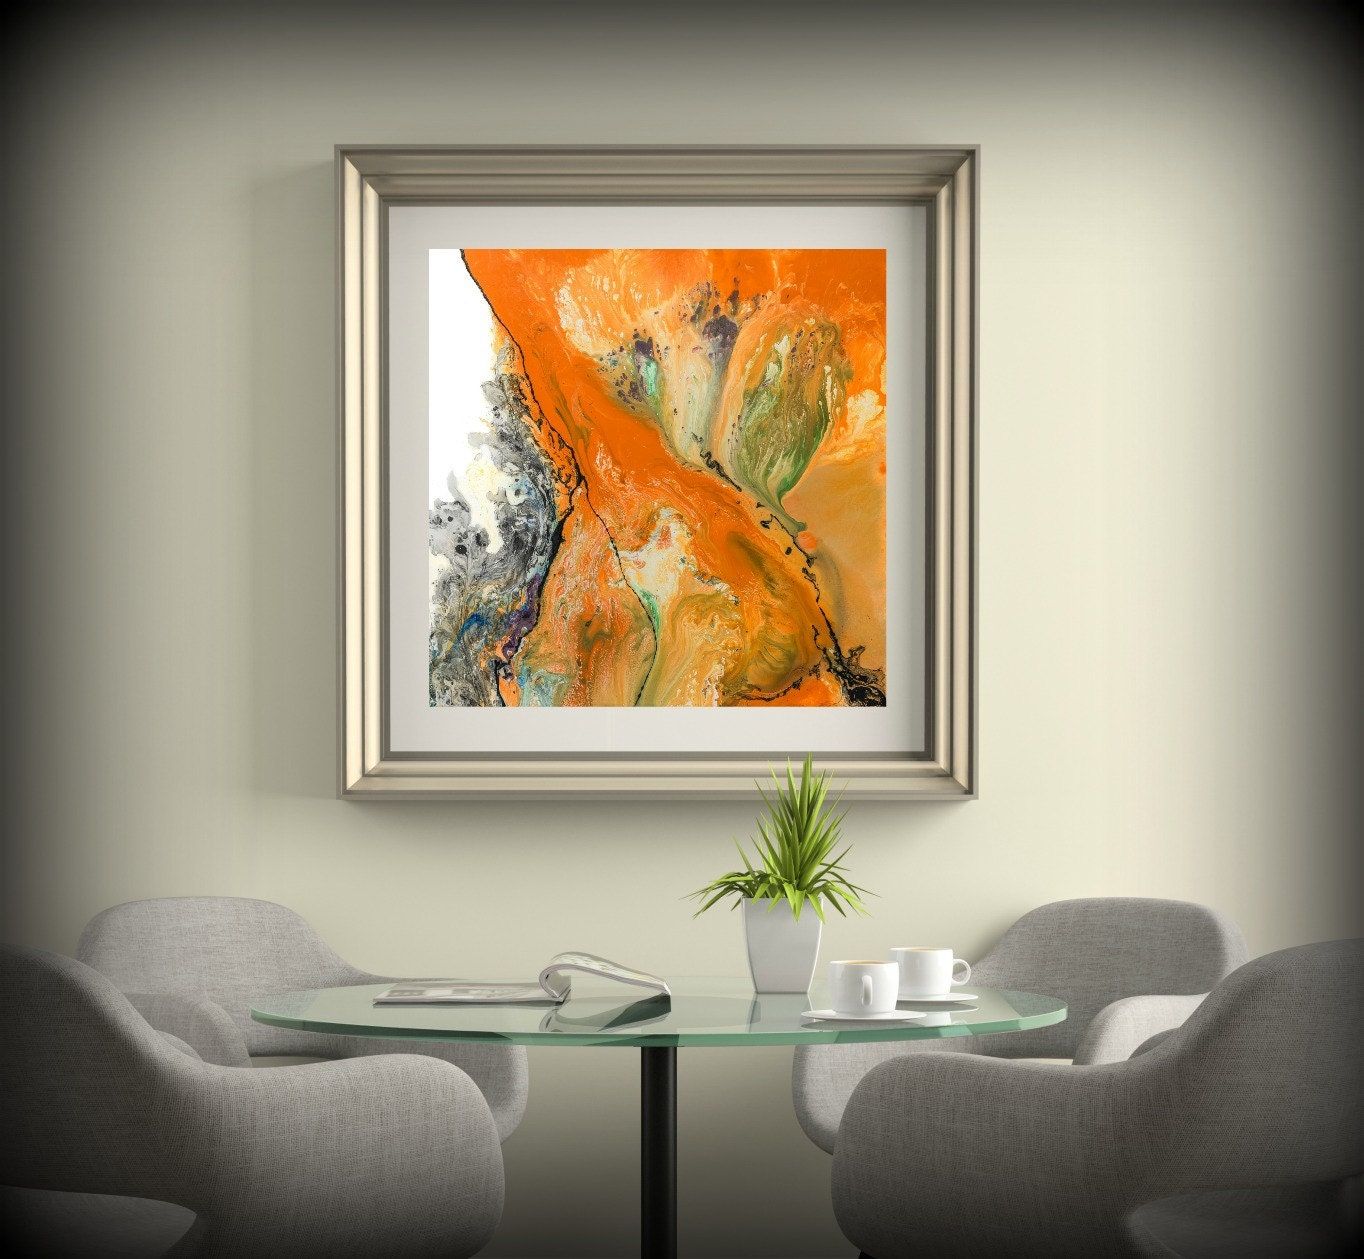 Living Room Decor Square Wall Decor Orange Wall Art Dining Room Decor With Regard To Latest Square Canvas Wall Art (View 16 of 20)